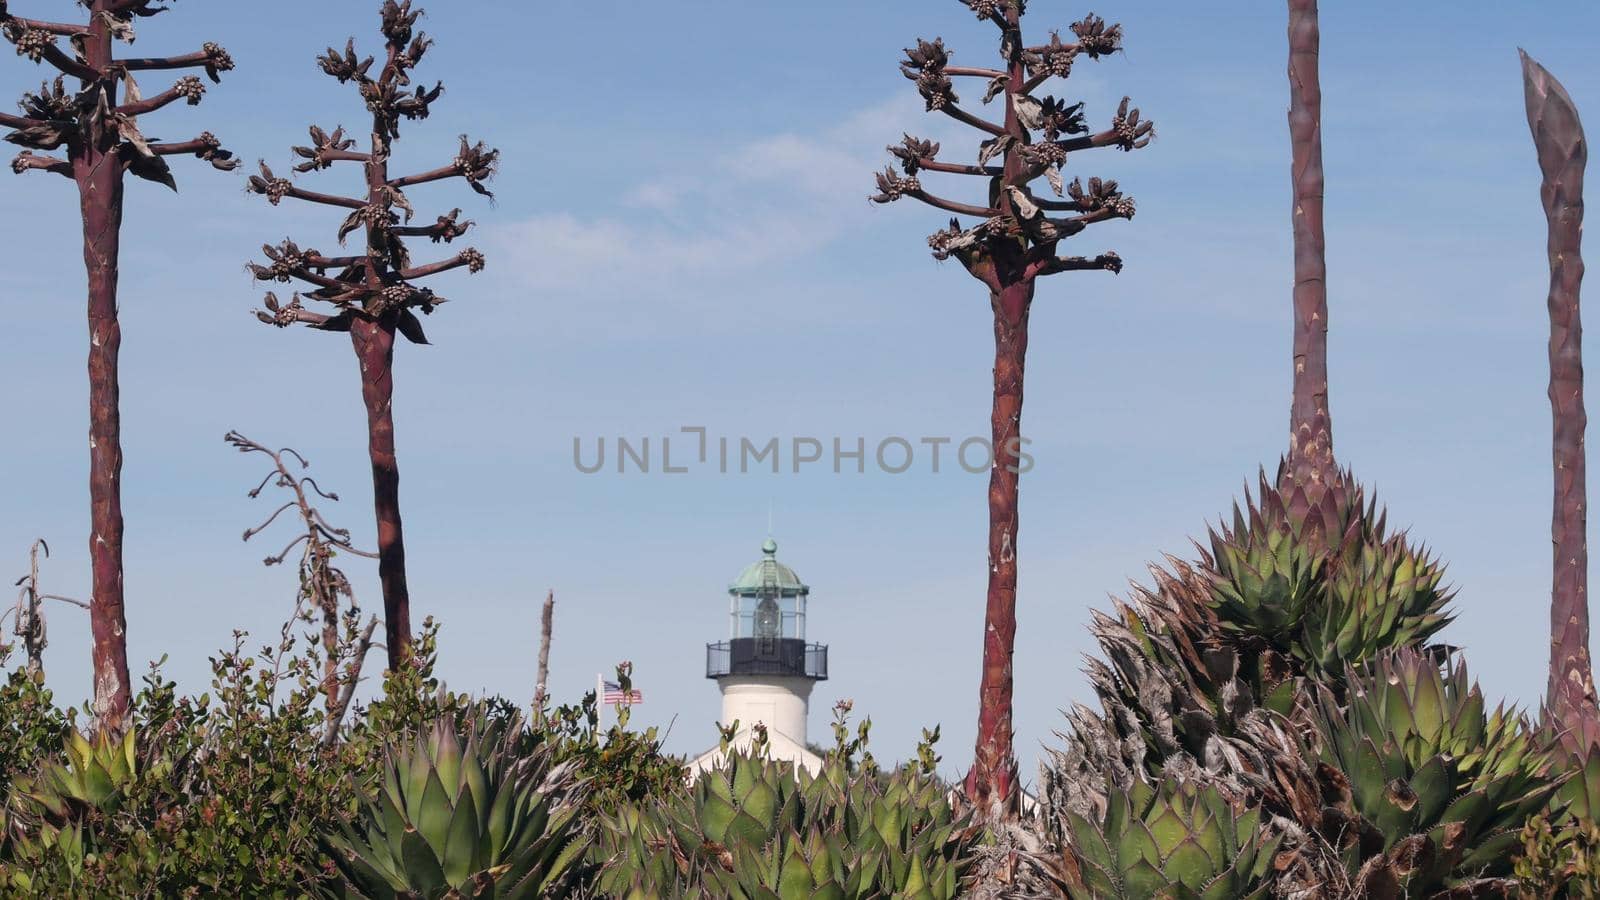 Vintage lighthouse tower, retro light house, old fashioned historic classic white beacon. Nautical navigation, coastal building 1855. Agave succulent plant flower. Point Loma San Diego, California USA